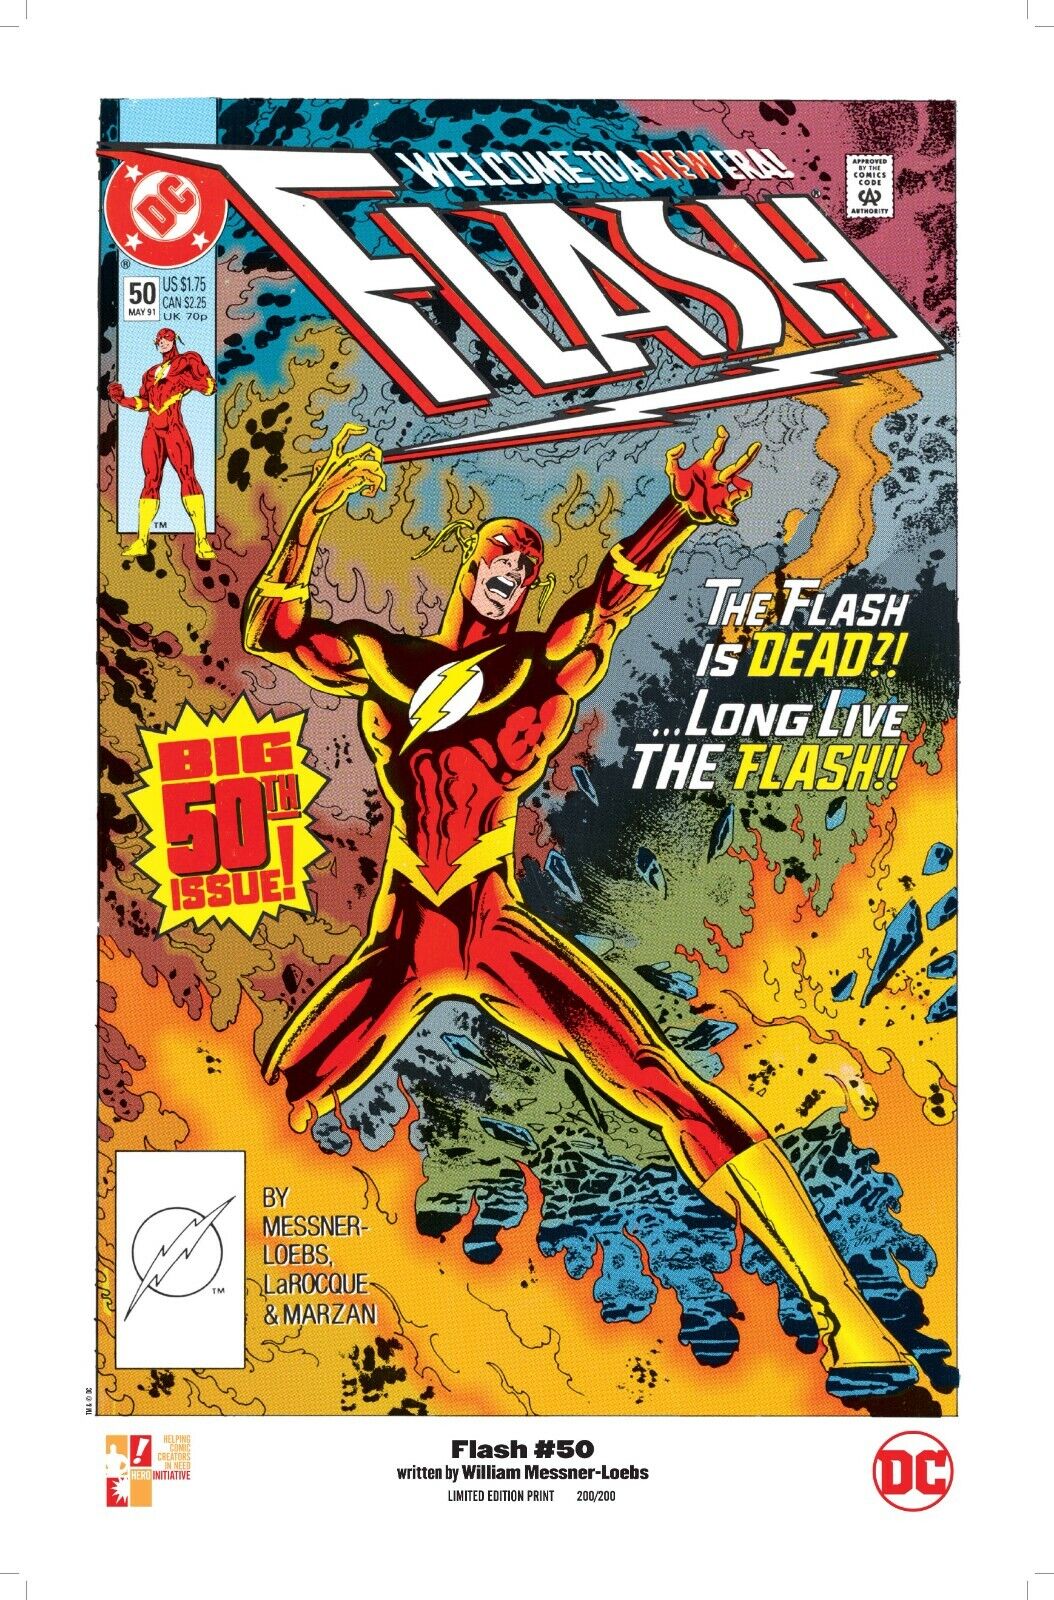 WILLIAM MESSNER-LOEBS signed THE FLASH #50 print, limited to 200